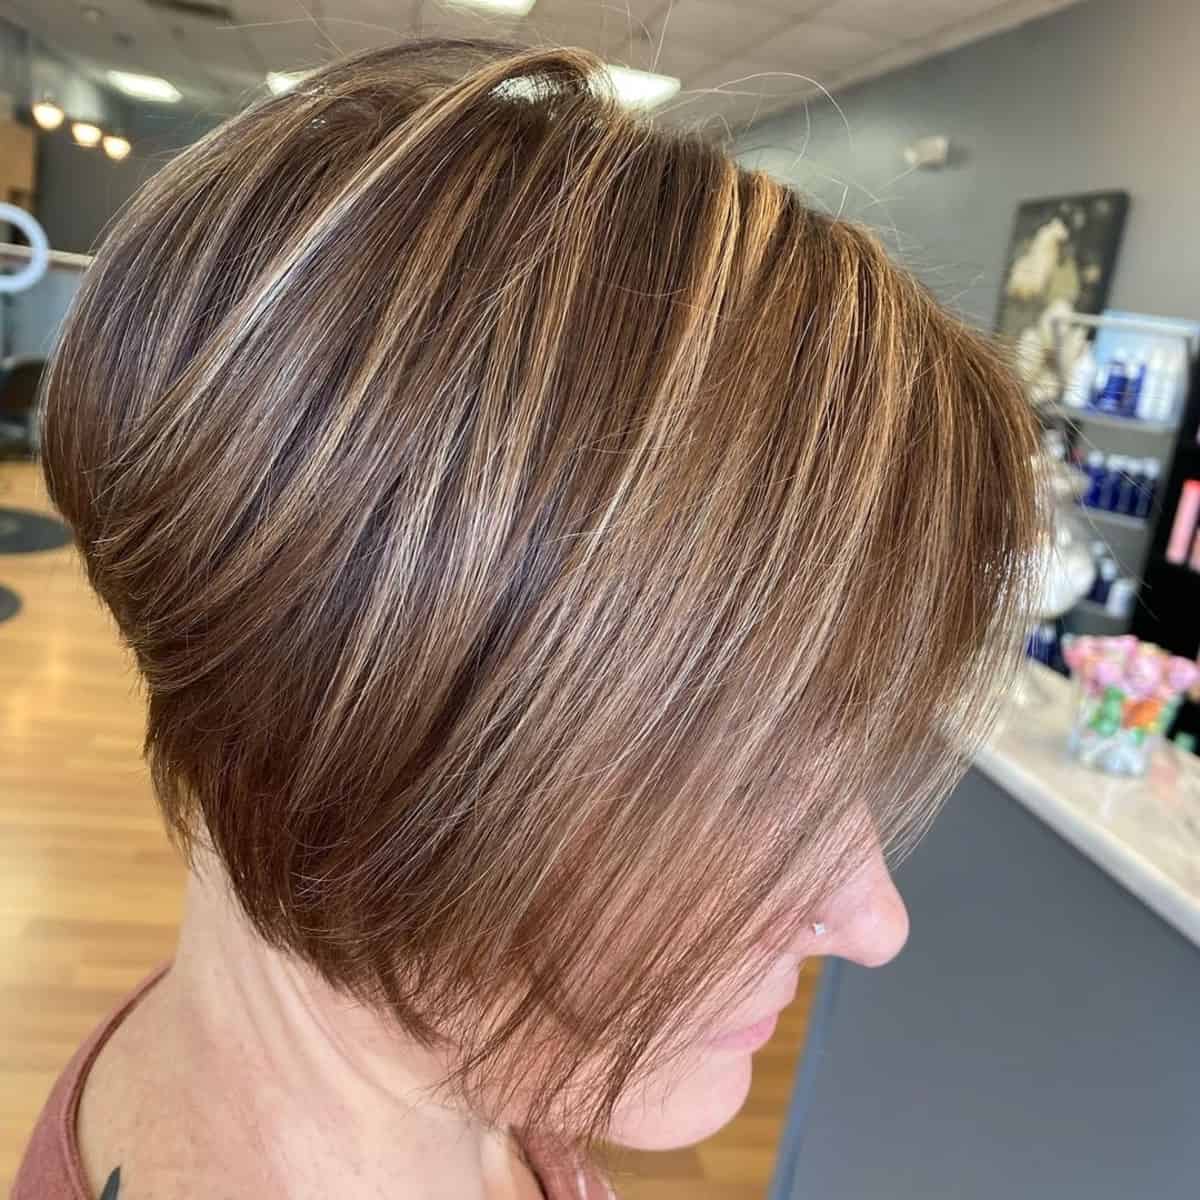 Flattering Jaw-Length Bob Haircut for Old Ladies